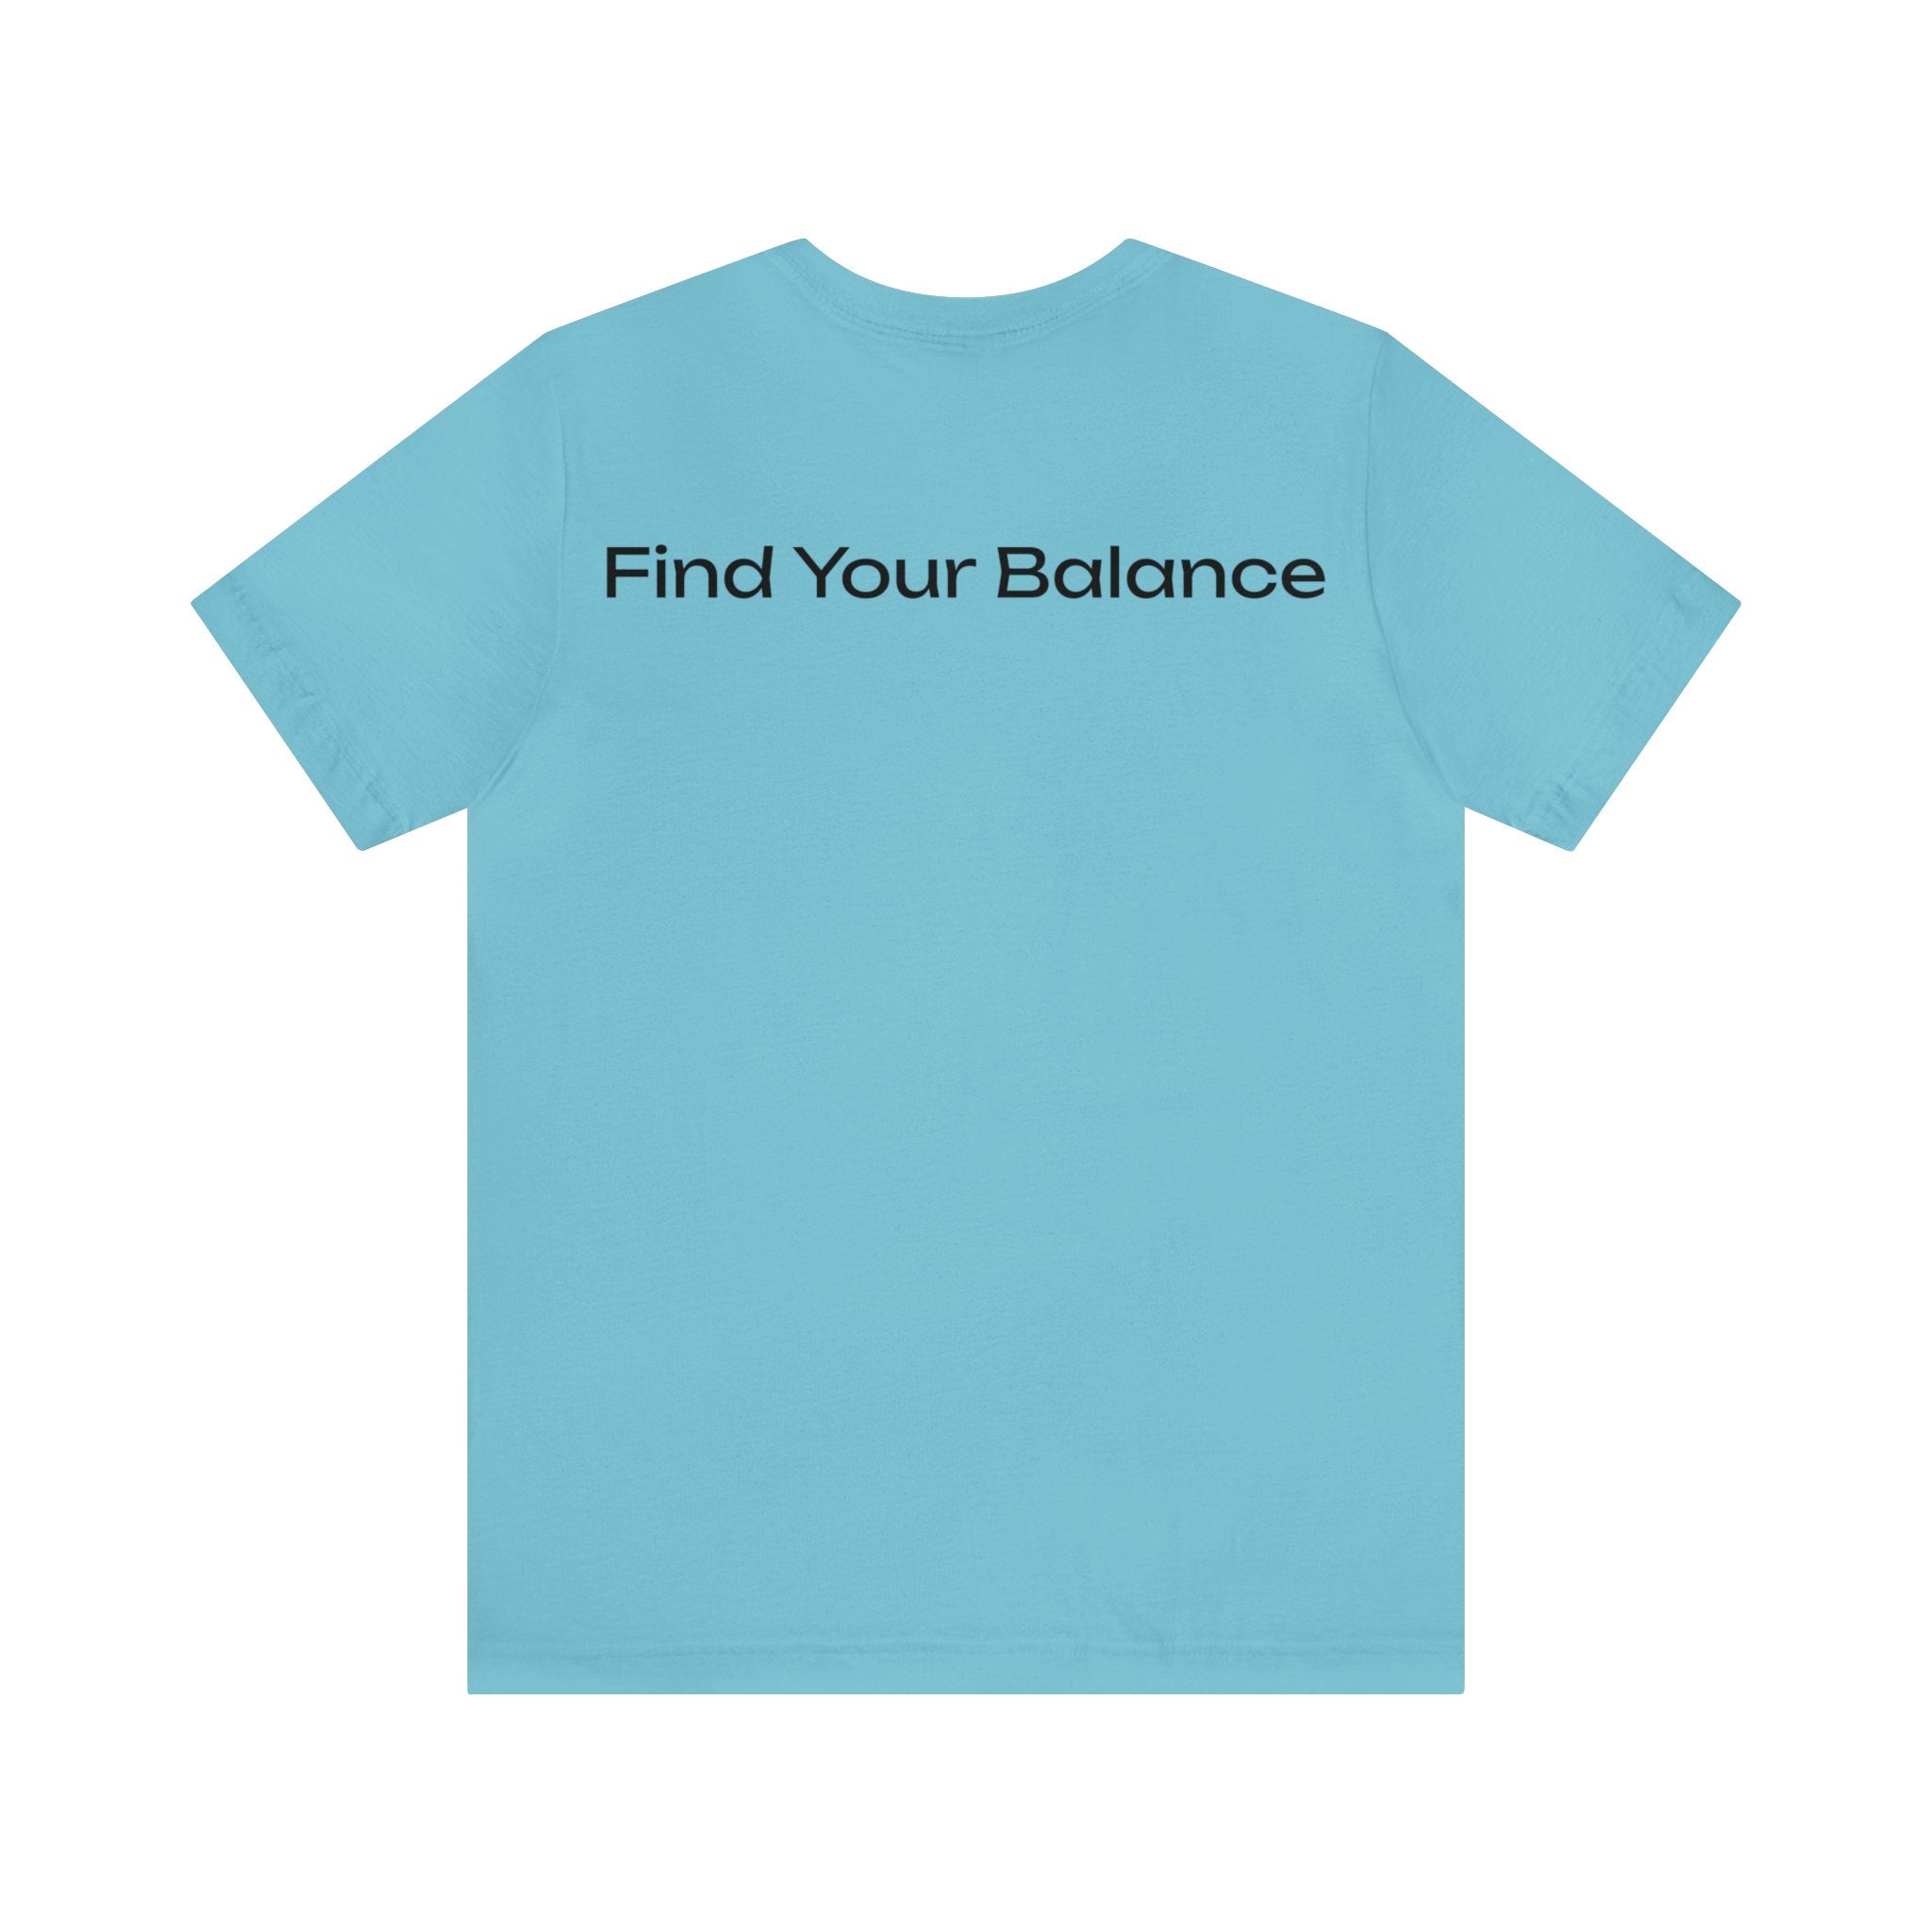 Find Your Balance Jersey Tee - Bella+Canvas 3001 Heather Mauve Airlume Cotton Bella+Canvas 3001 Crew Neckline Jersey Short Sleeve Lightweight Fabric Mental Health Support Retail Fit Tear-away Label Tee Unisex Tee T-Shirt 17947839918575636713_2048 Printify